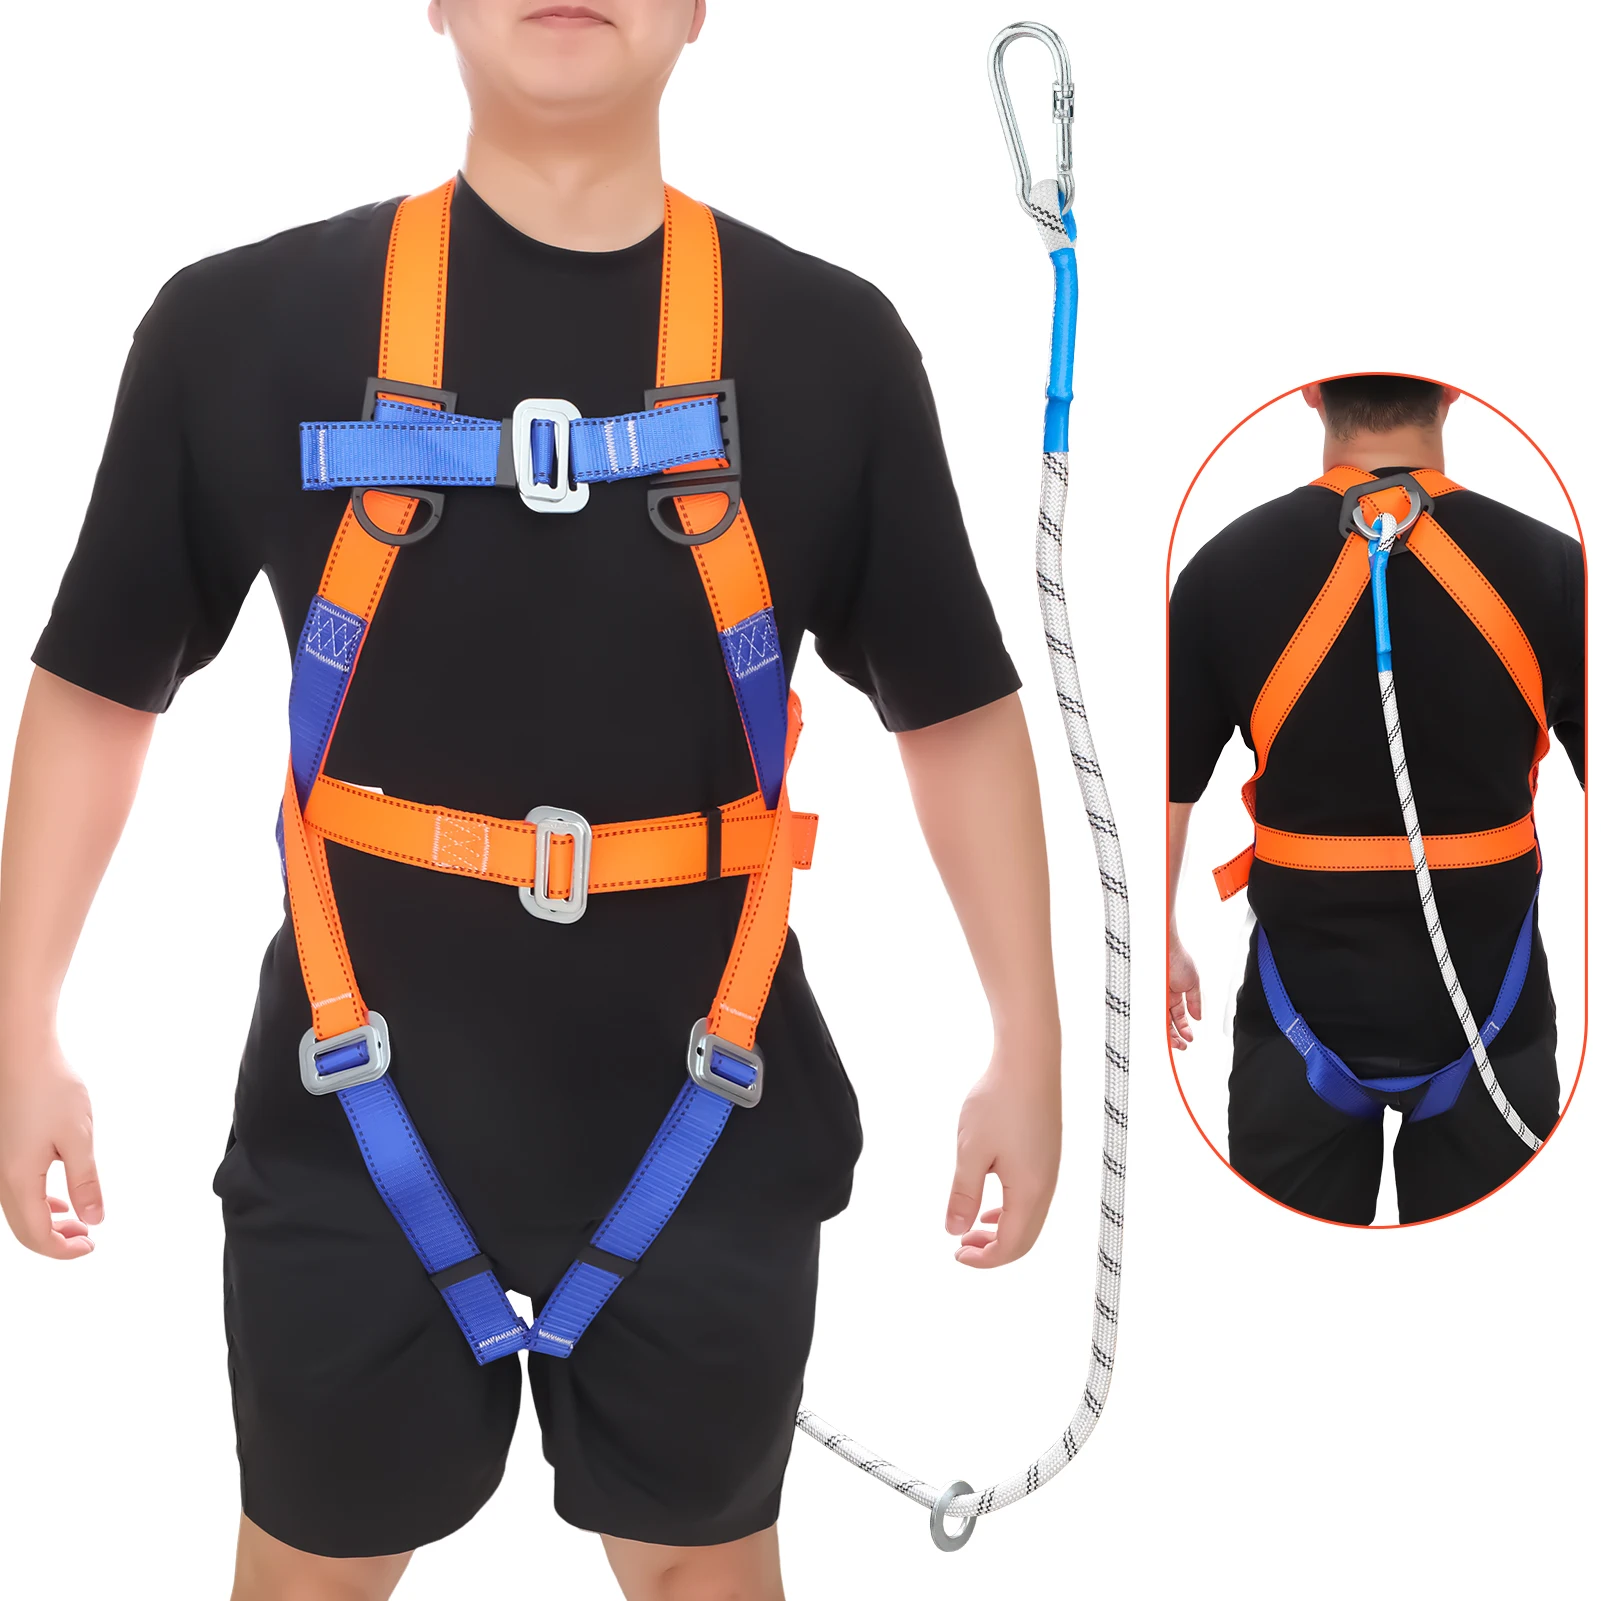 safety-roofing-harness-with-hook-fall-durable-polyester-fibre-material-for-hiking-camping-adventure-tool